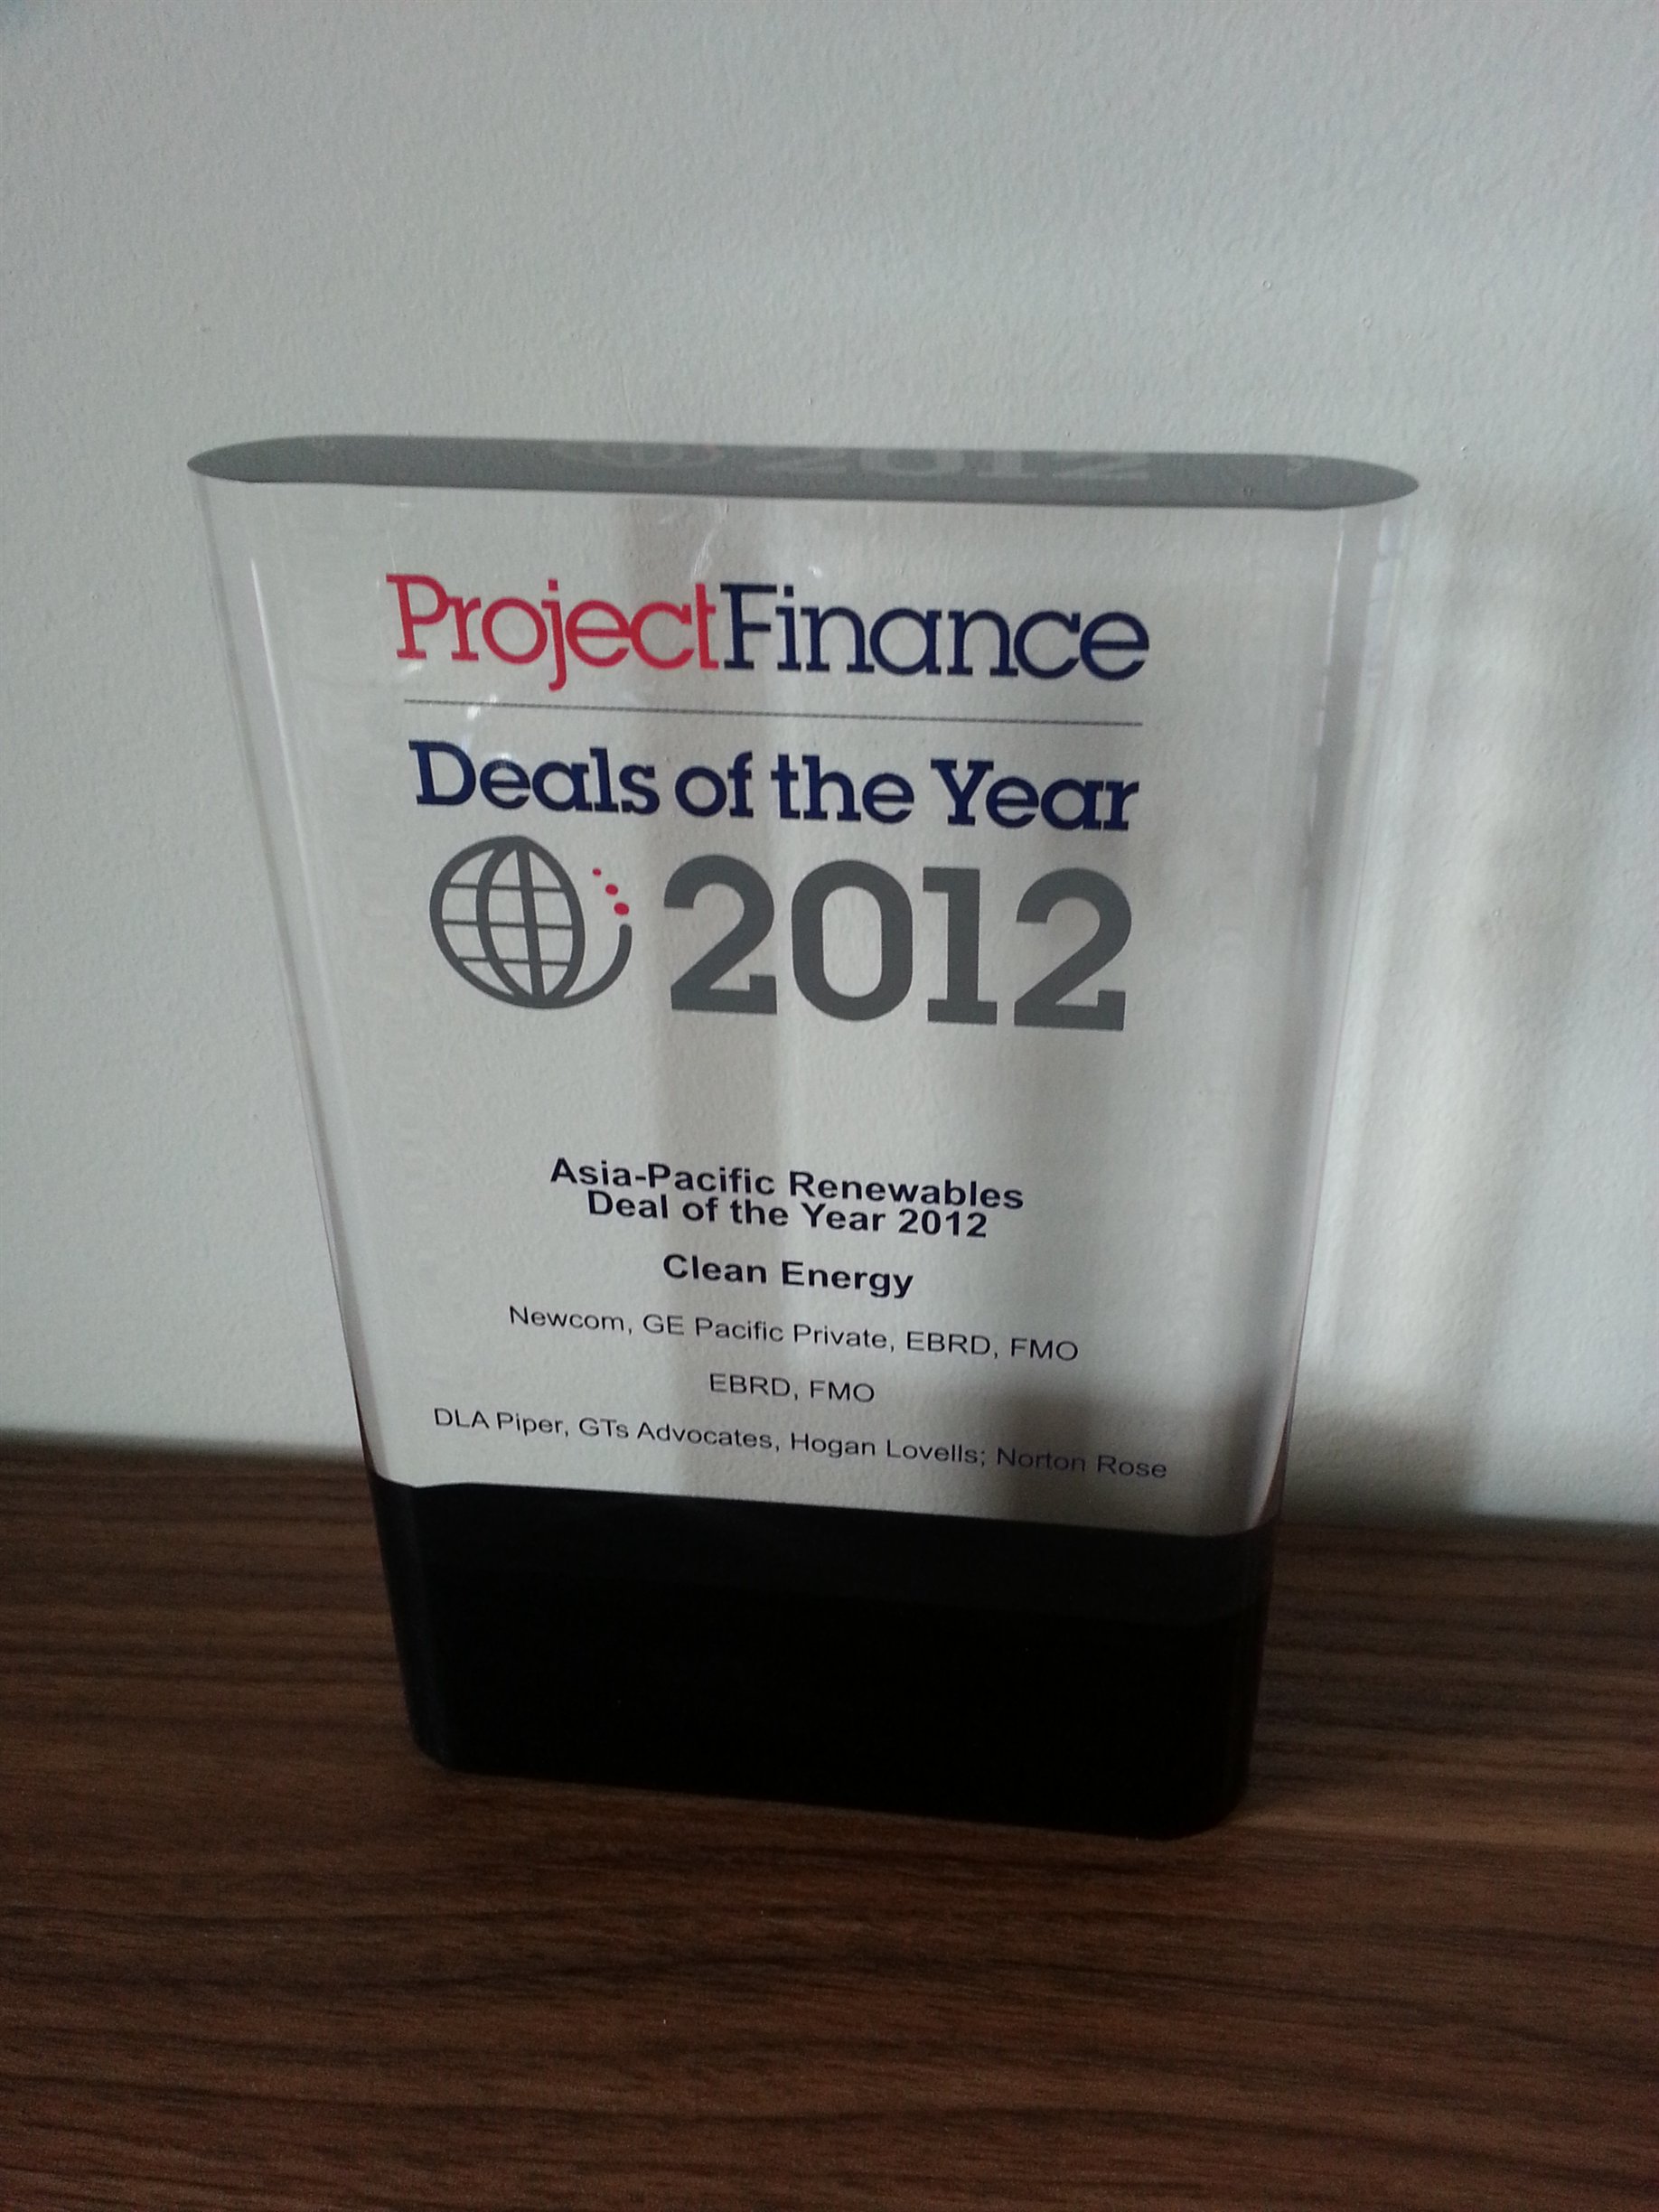 Asia-Pacific Renewables Deal of the Year 2012